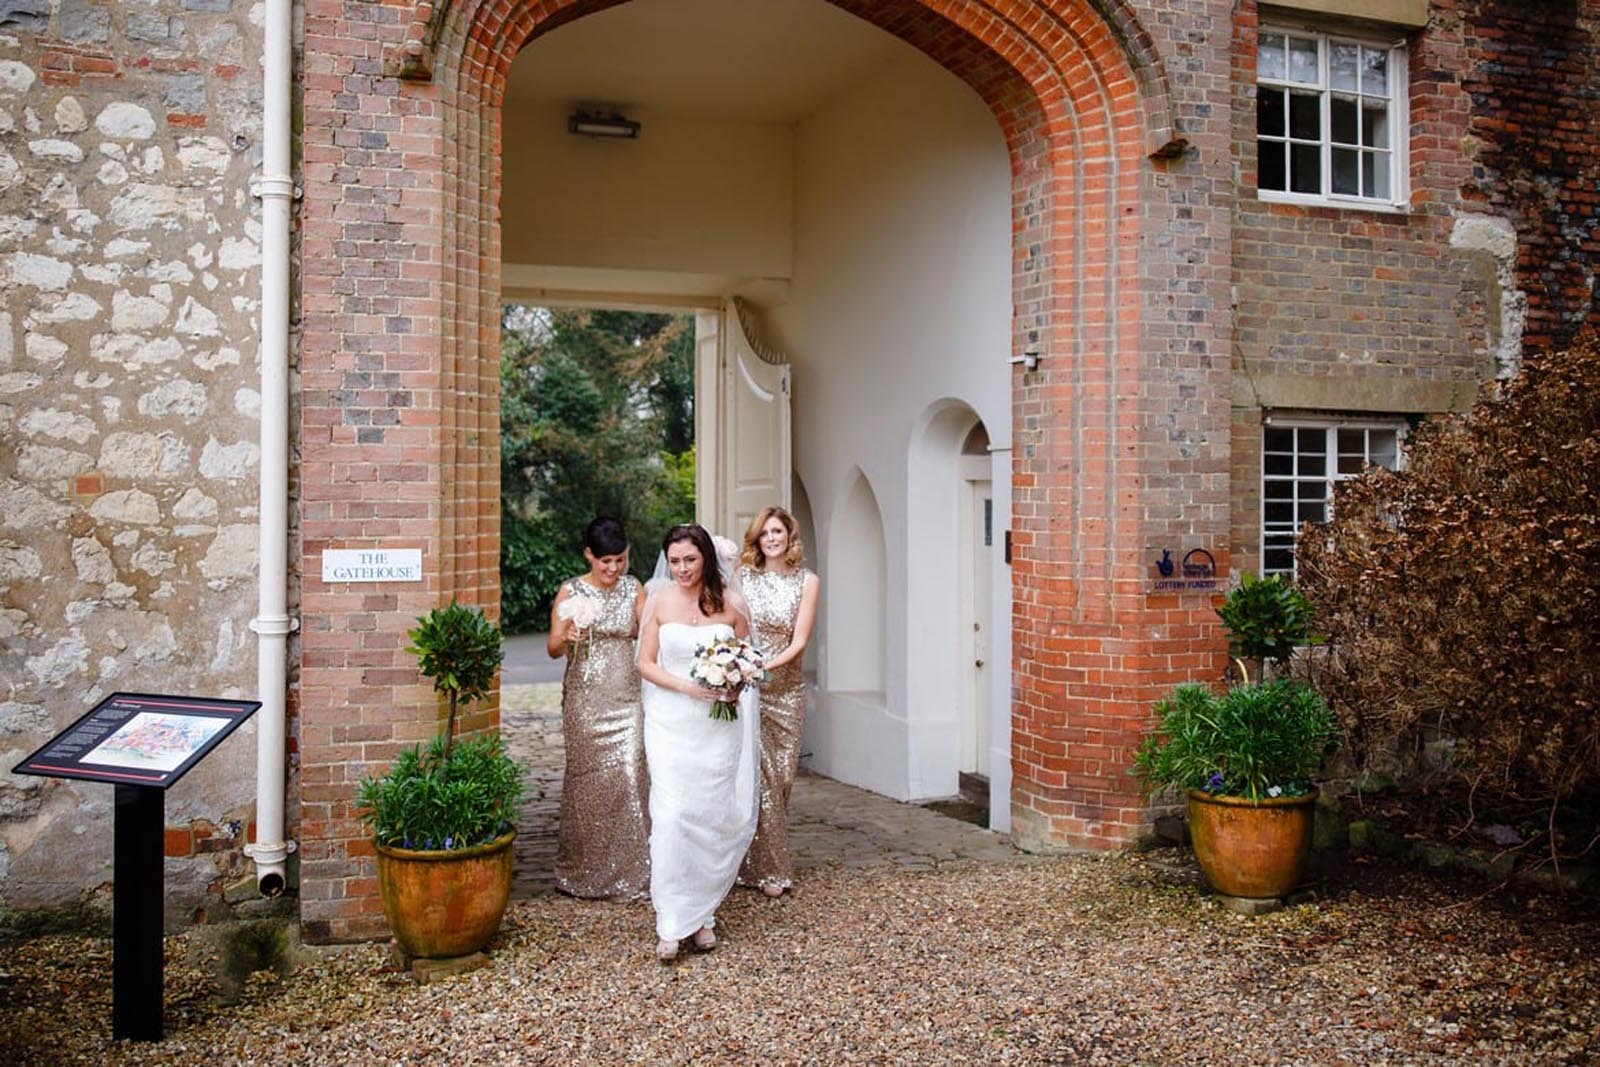 Bridal party walking through the grounds of Farnham castle